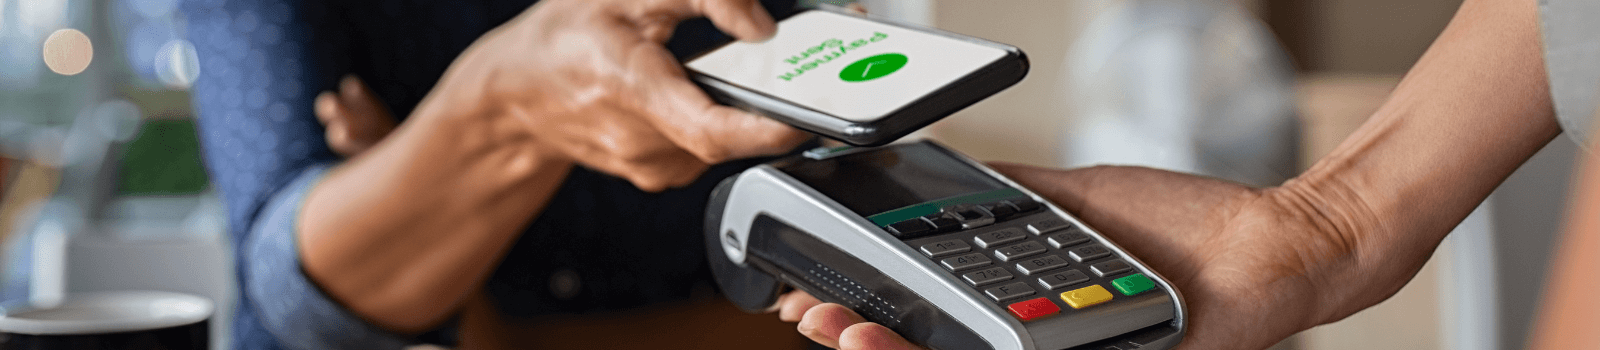 Contactless Retail The Way Forward For In store Retail